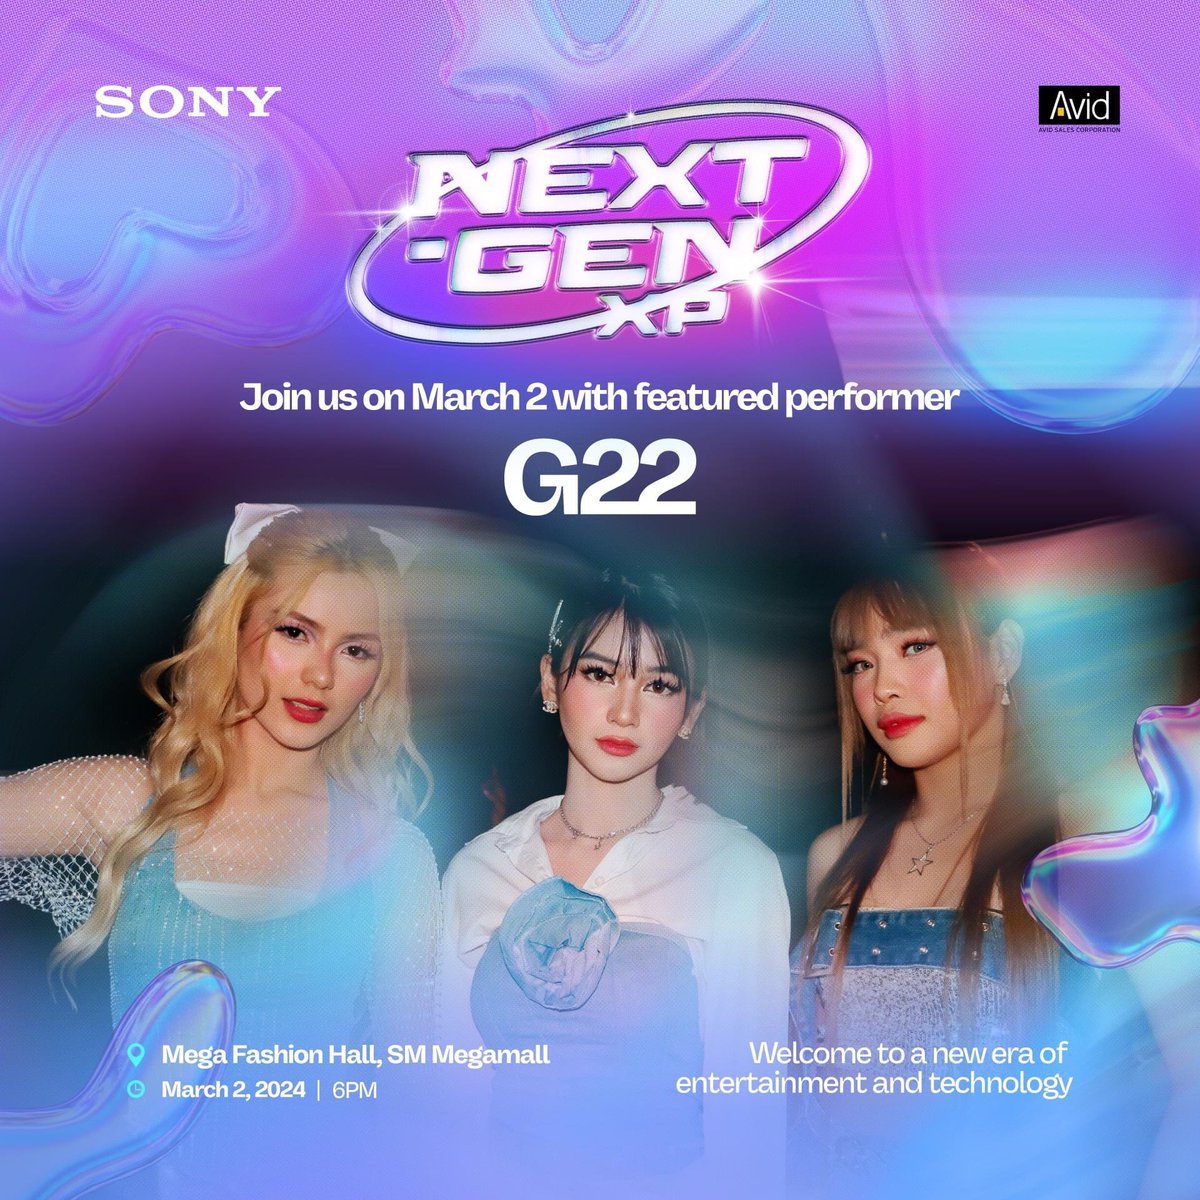 Join us as we celebrate the evolution of entertainment and technology with Sony.

6PM today at SM Megamall, Fashion Hall 

#SonyNextGeneration #SonyPH